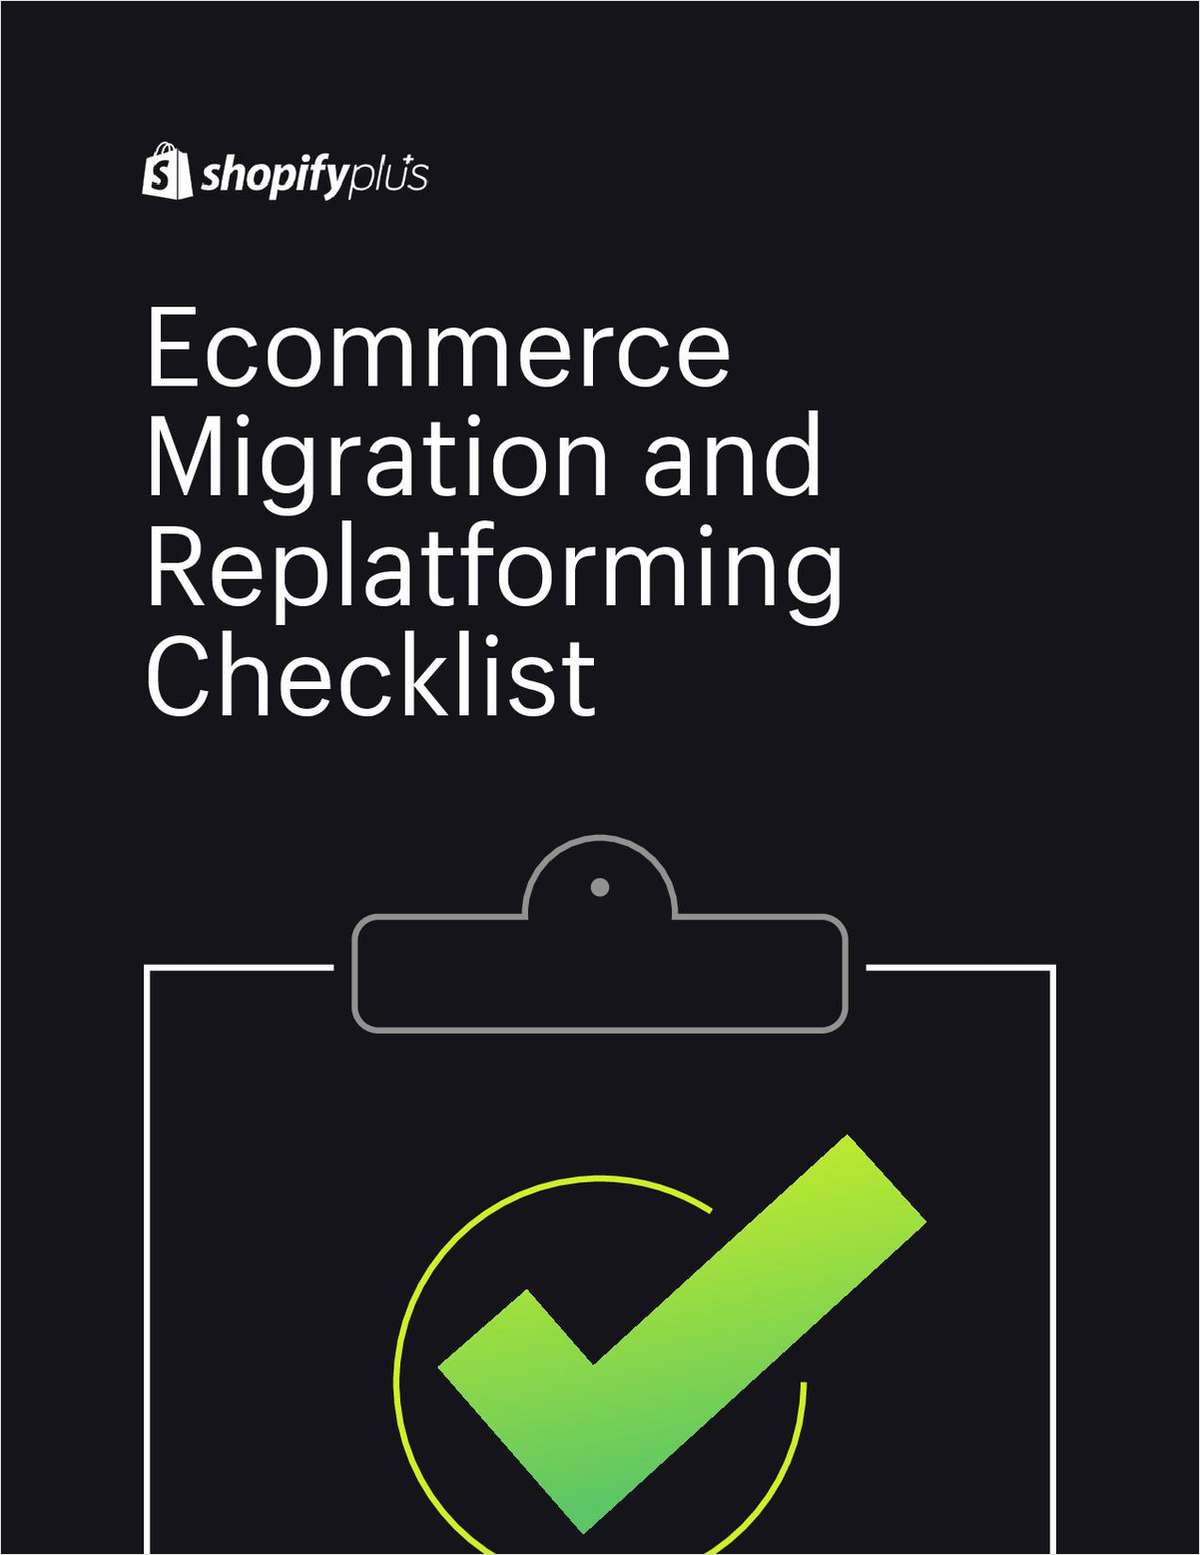 Simplify Your Ecommerce Migration and Replatforming